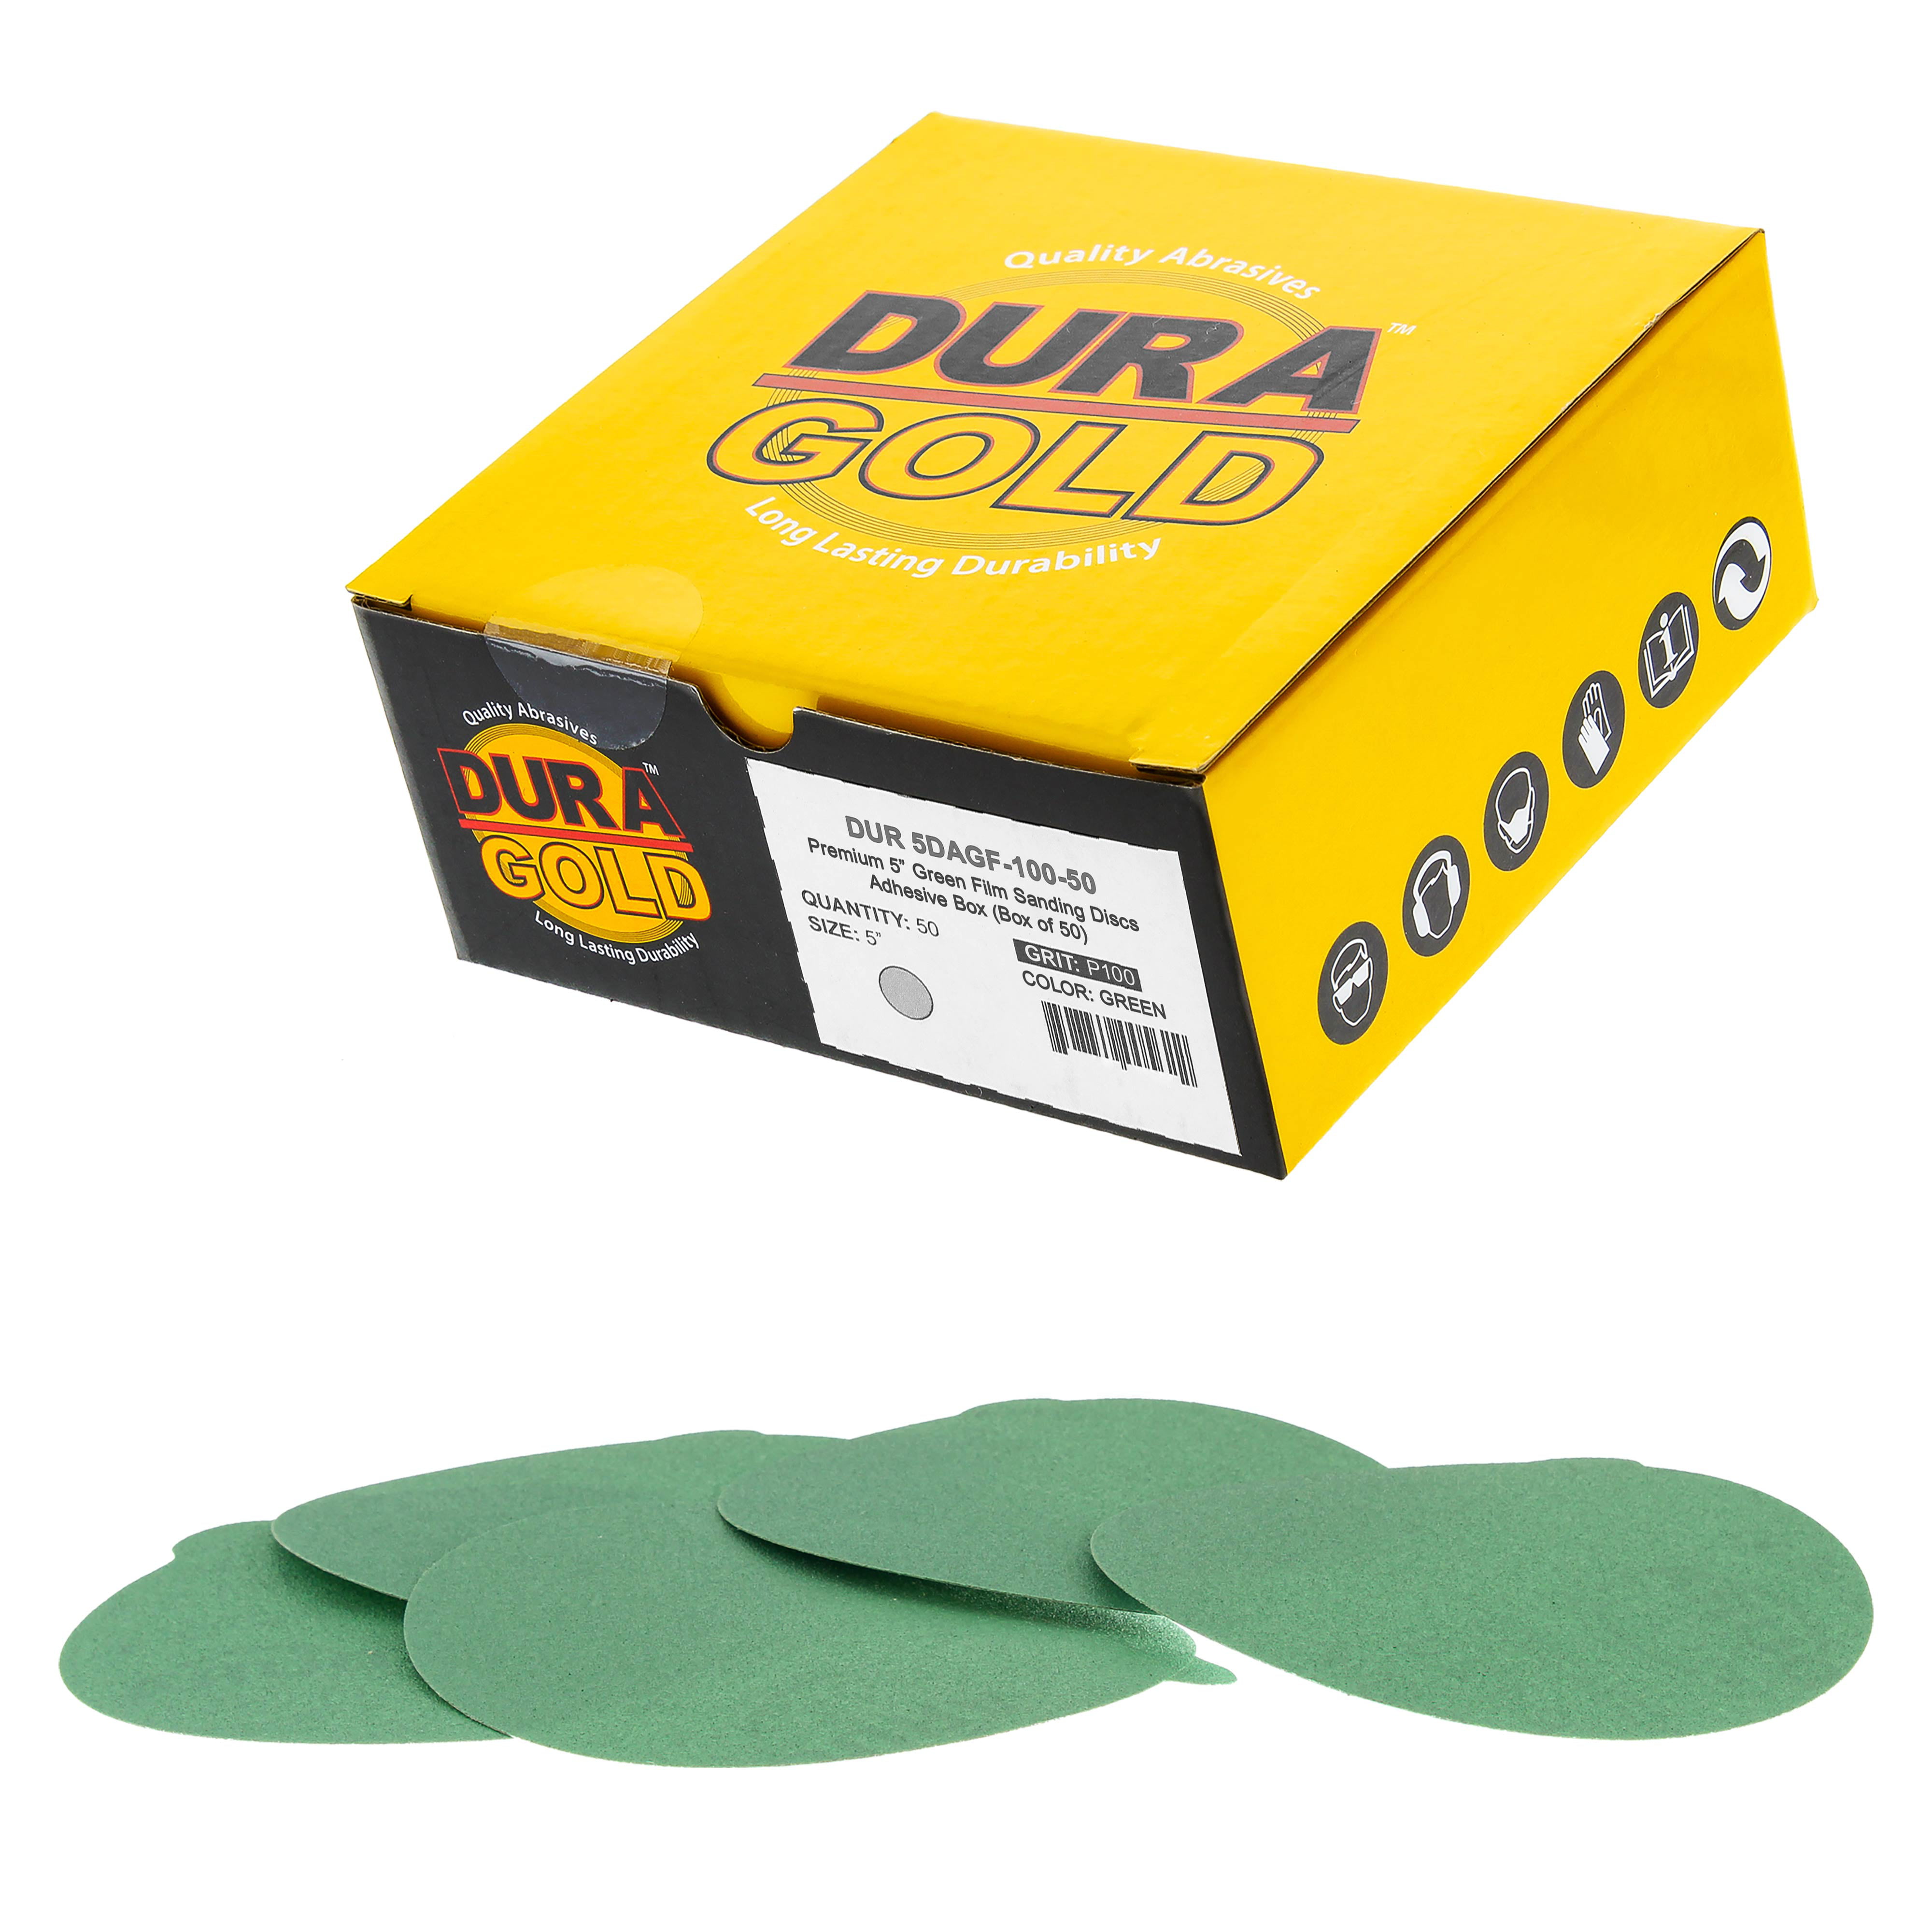 Dura-Gold Premium 9 Drywall Sanding Discs Box of 10 High-Performance Fast Cutting Aluminum Oxide Abrasive 60 Grit - Sandpaper Discs with PSA Self Adhesive Stickyback For Drywall Power Sander 